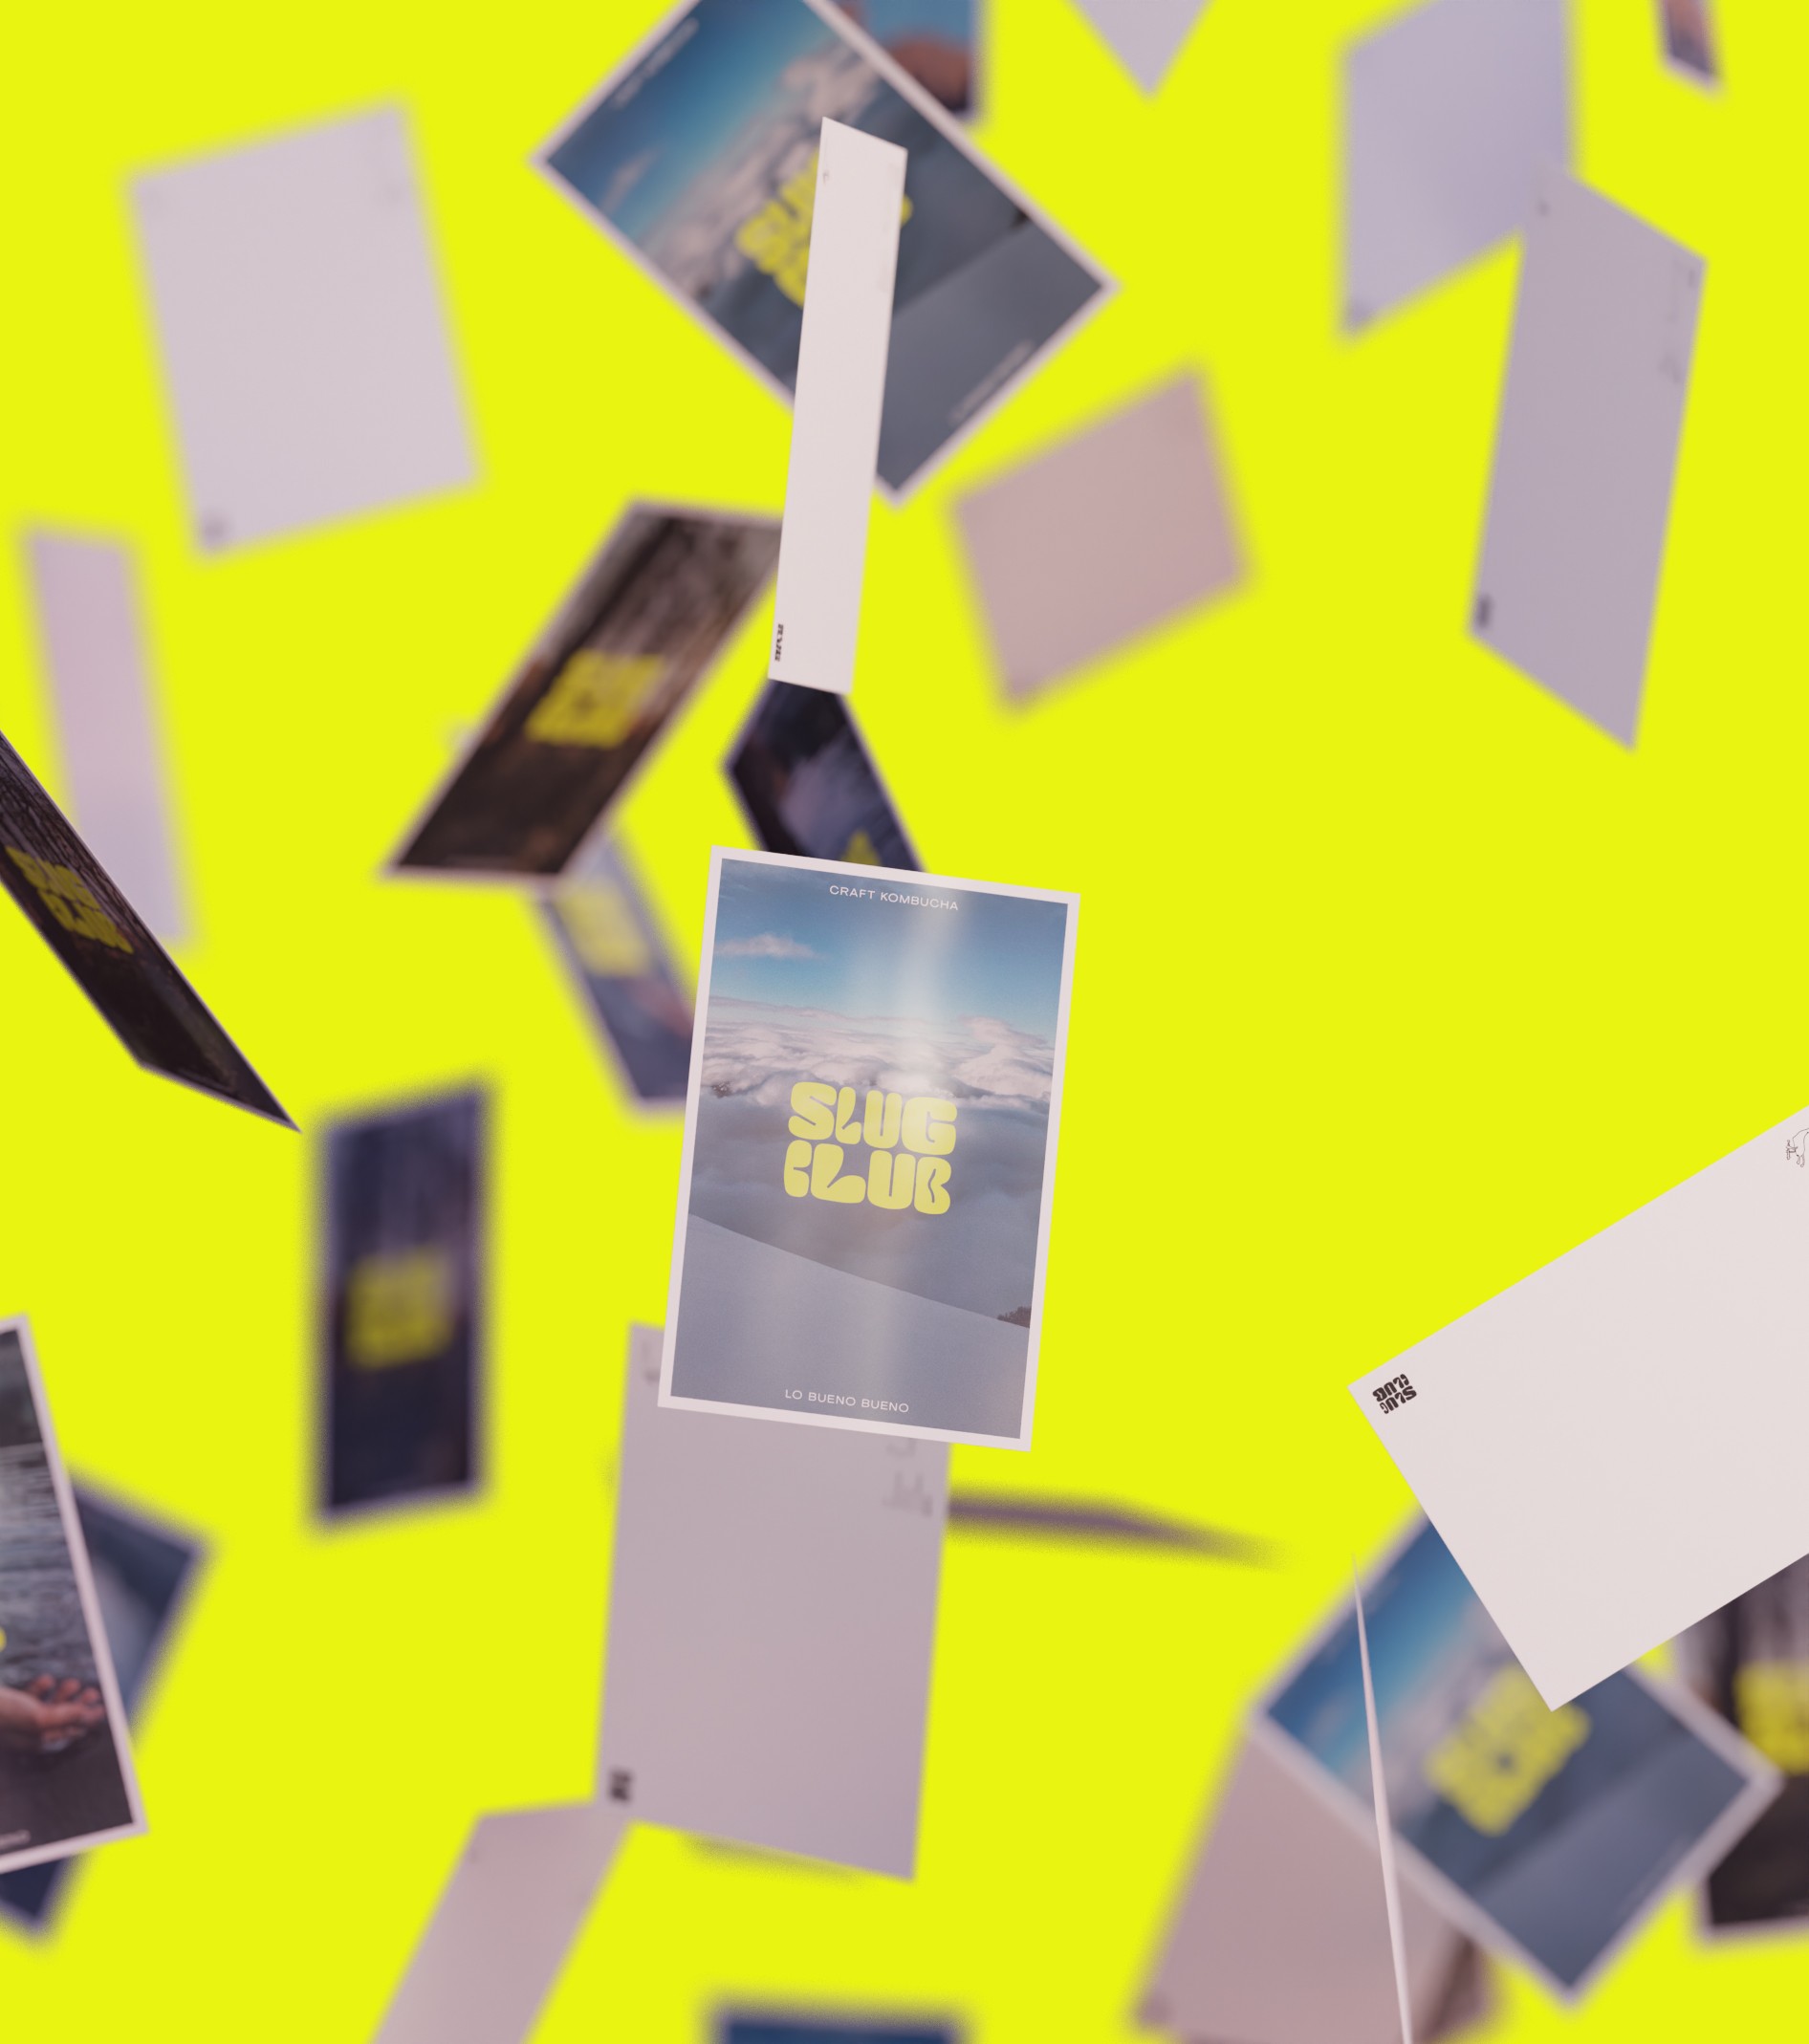 Postcards floating in vibrant yellow space